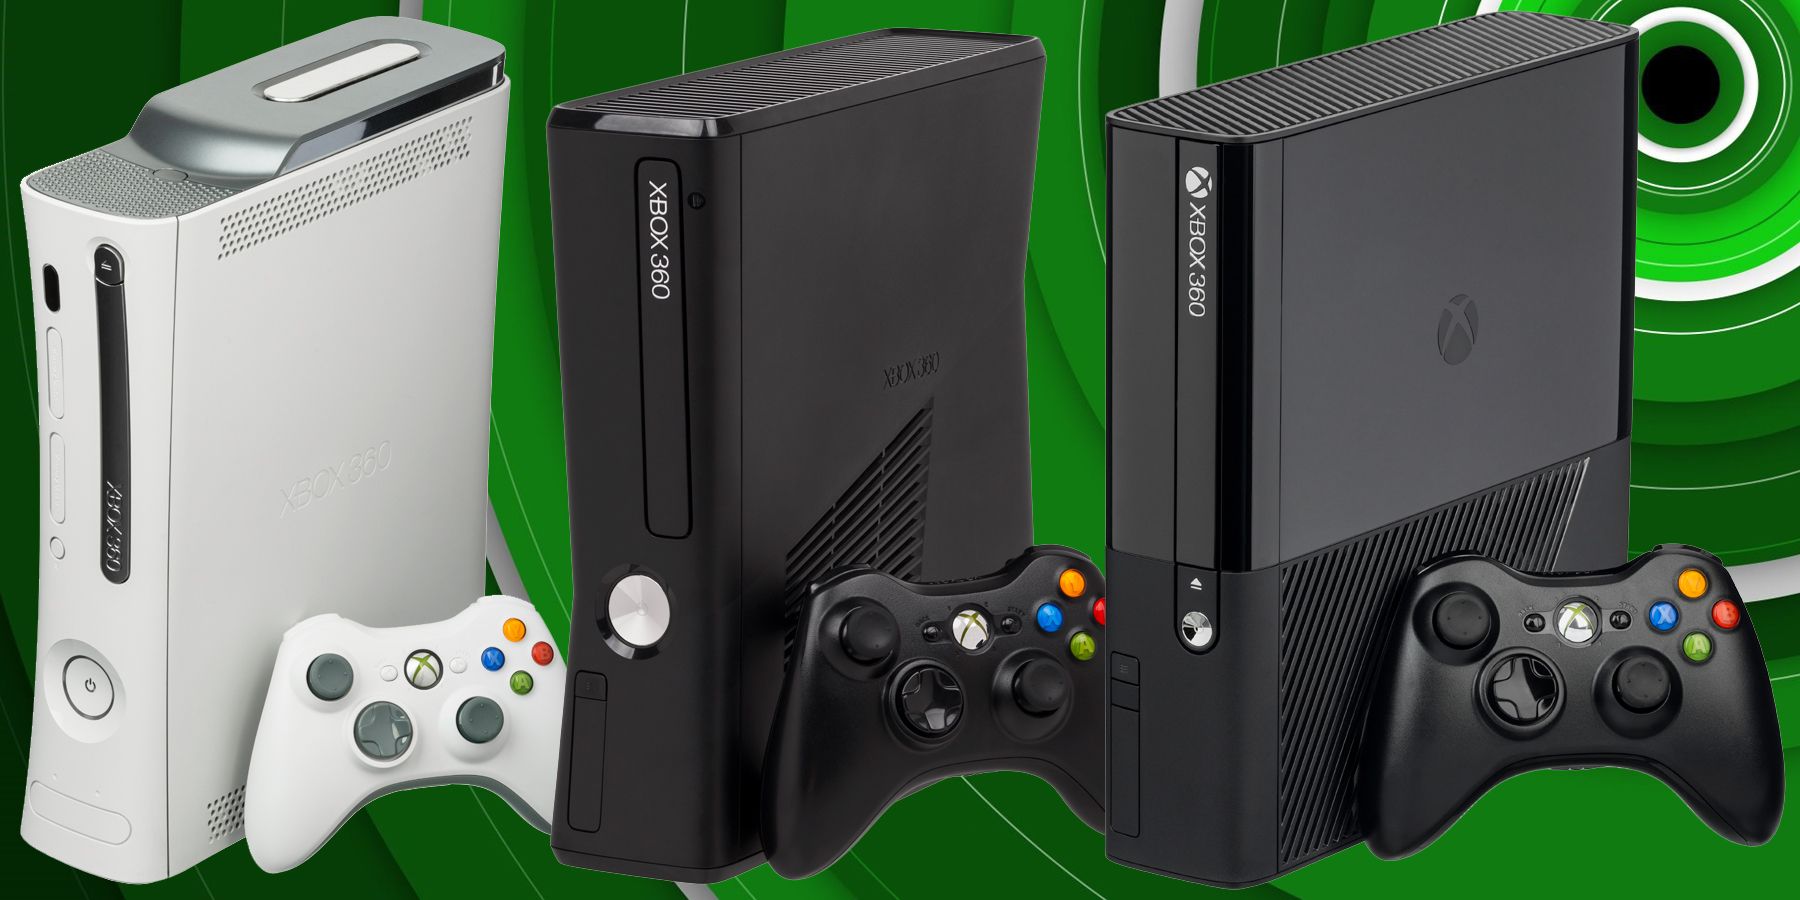 Microsoft Releases New Update for Xbox 360 Consoles